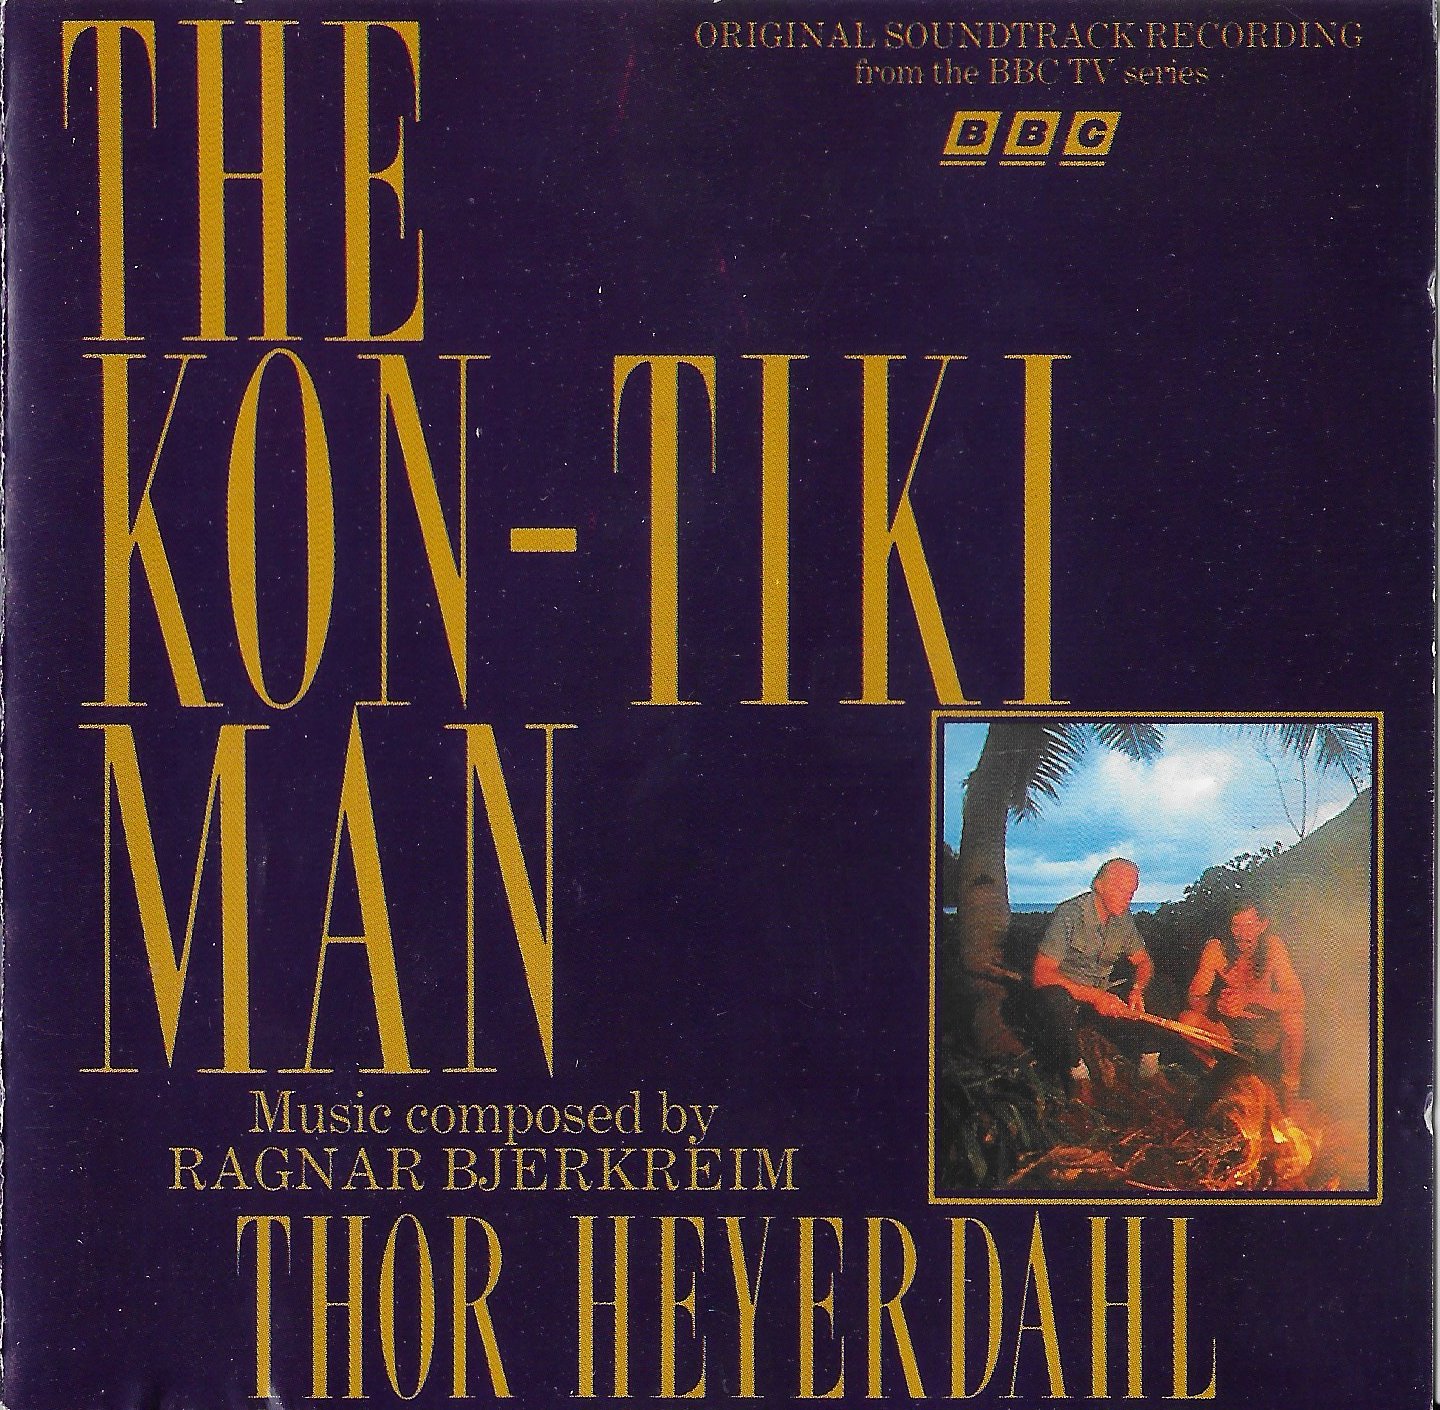 Picture of BBCCD780 The Kon-Tiki man by artist Ragnar Bjerkreim from the BBC records and Tapes library